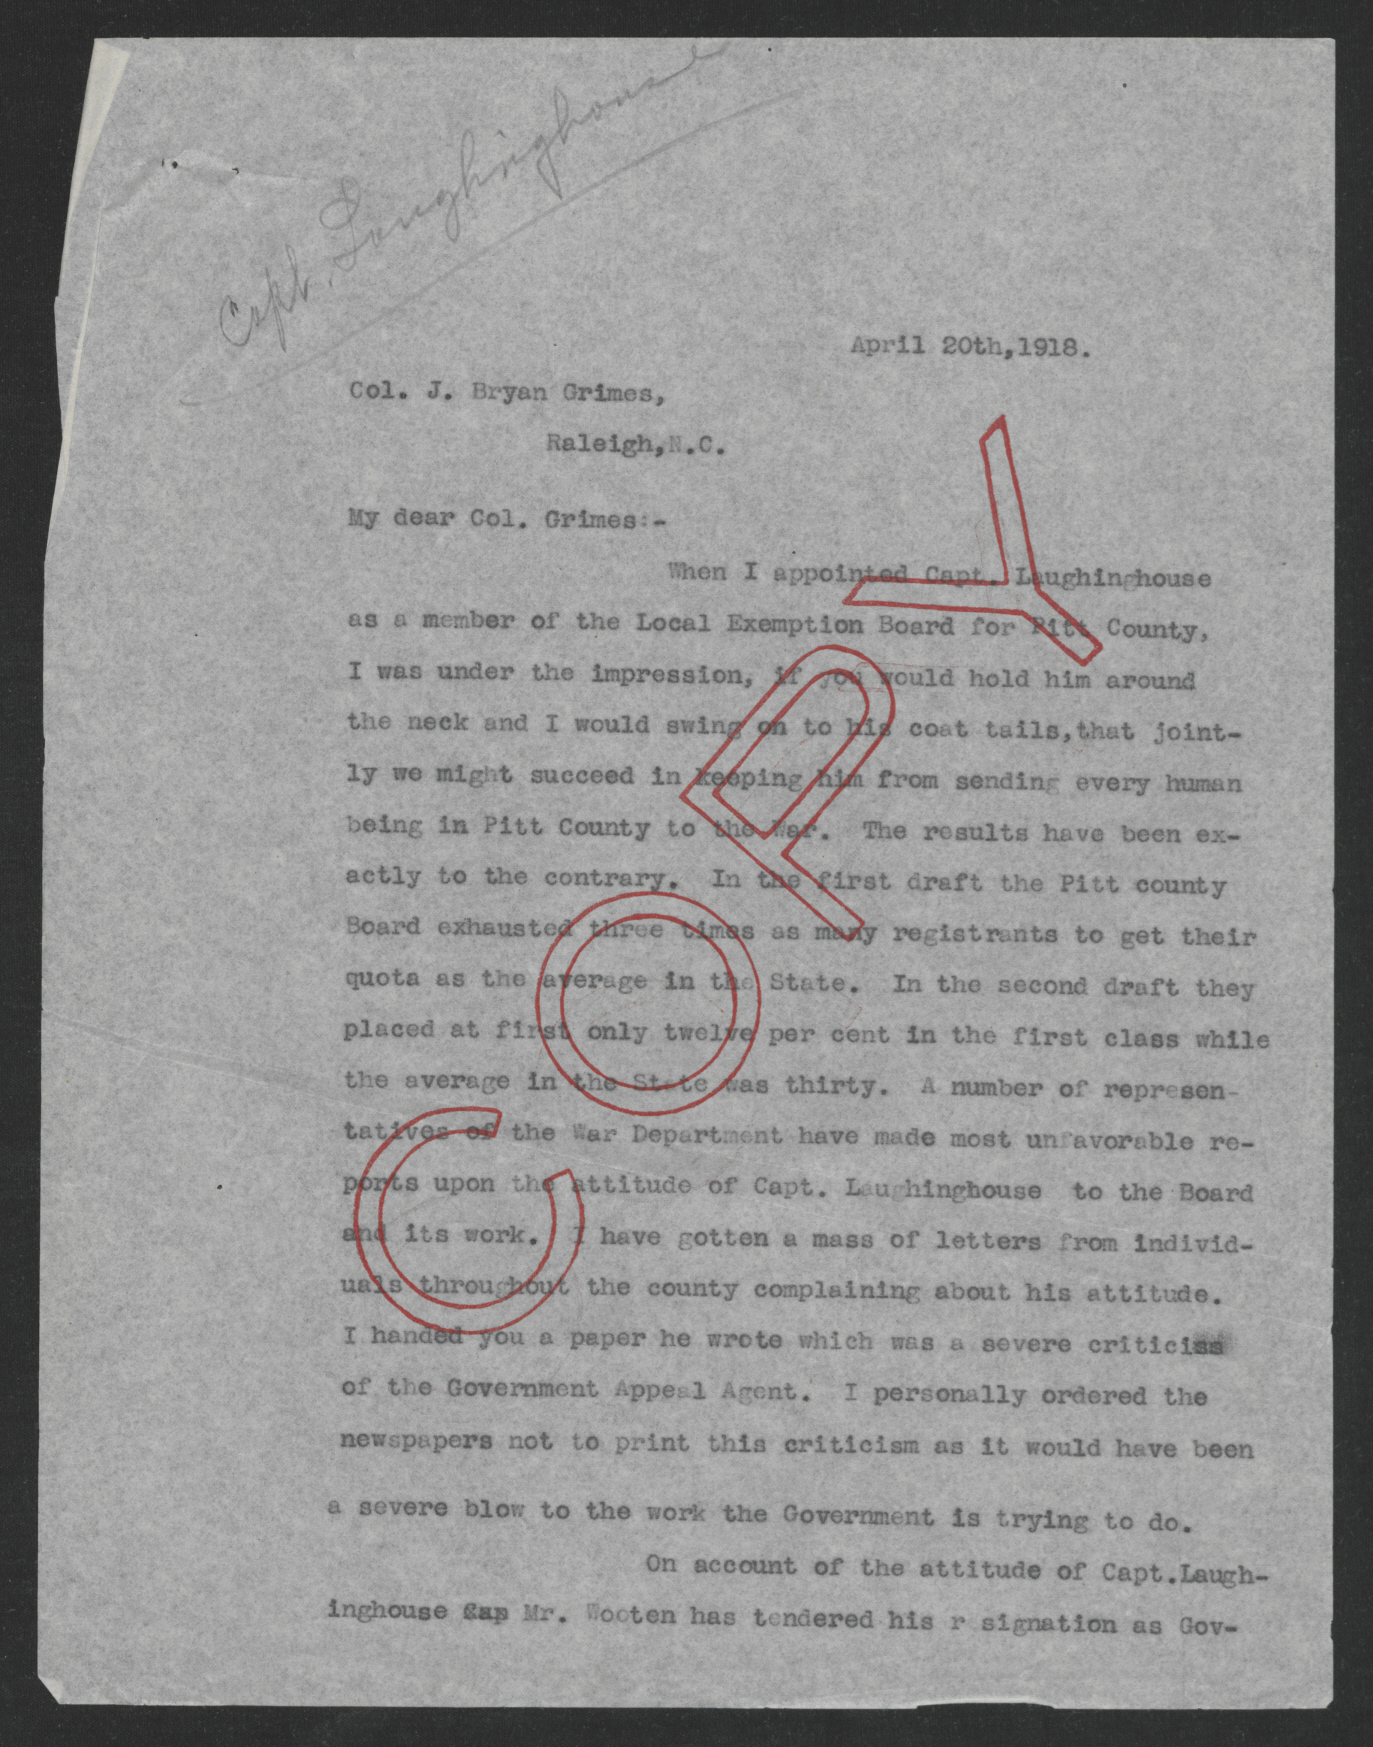 Letter from Thomas W. Bickett to J. Bryan Grimes, April 20, 1918, page 1